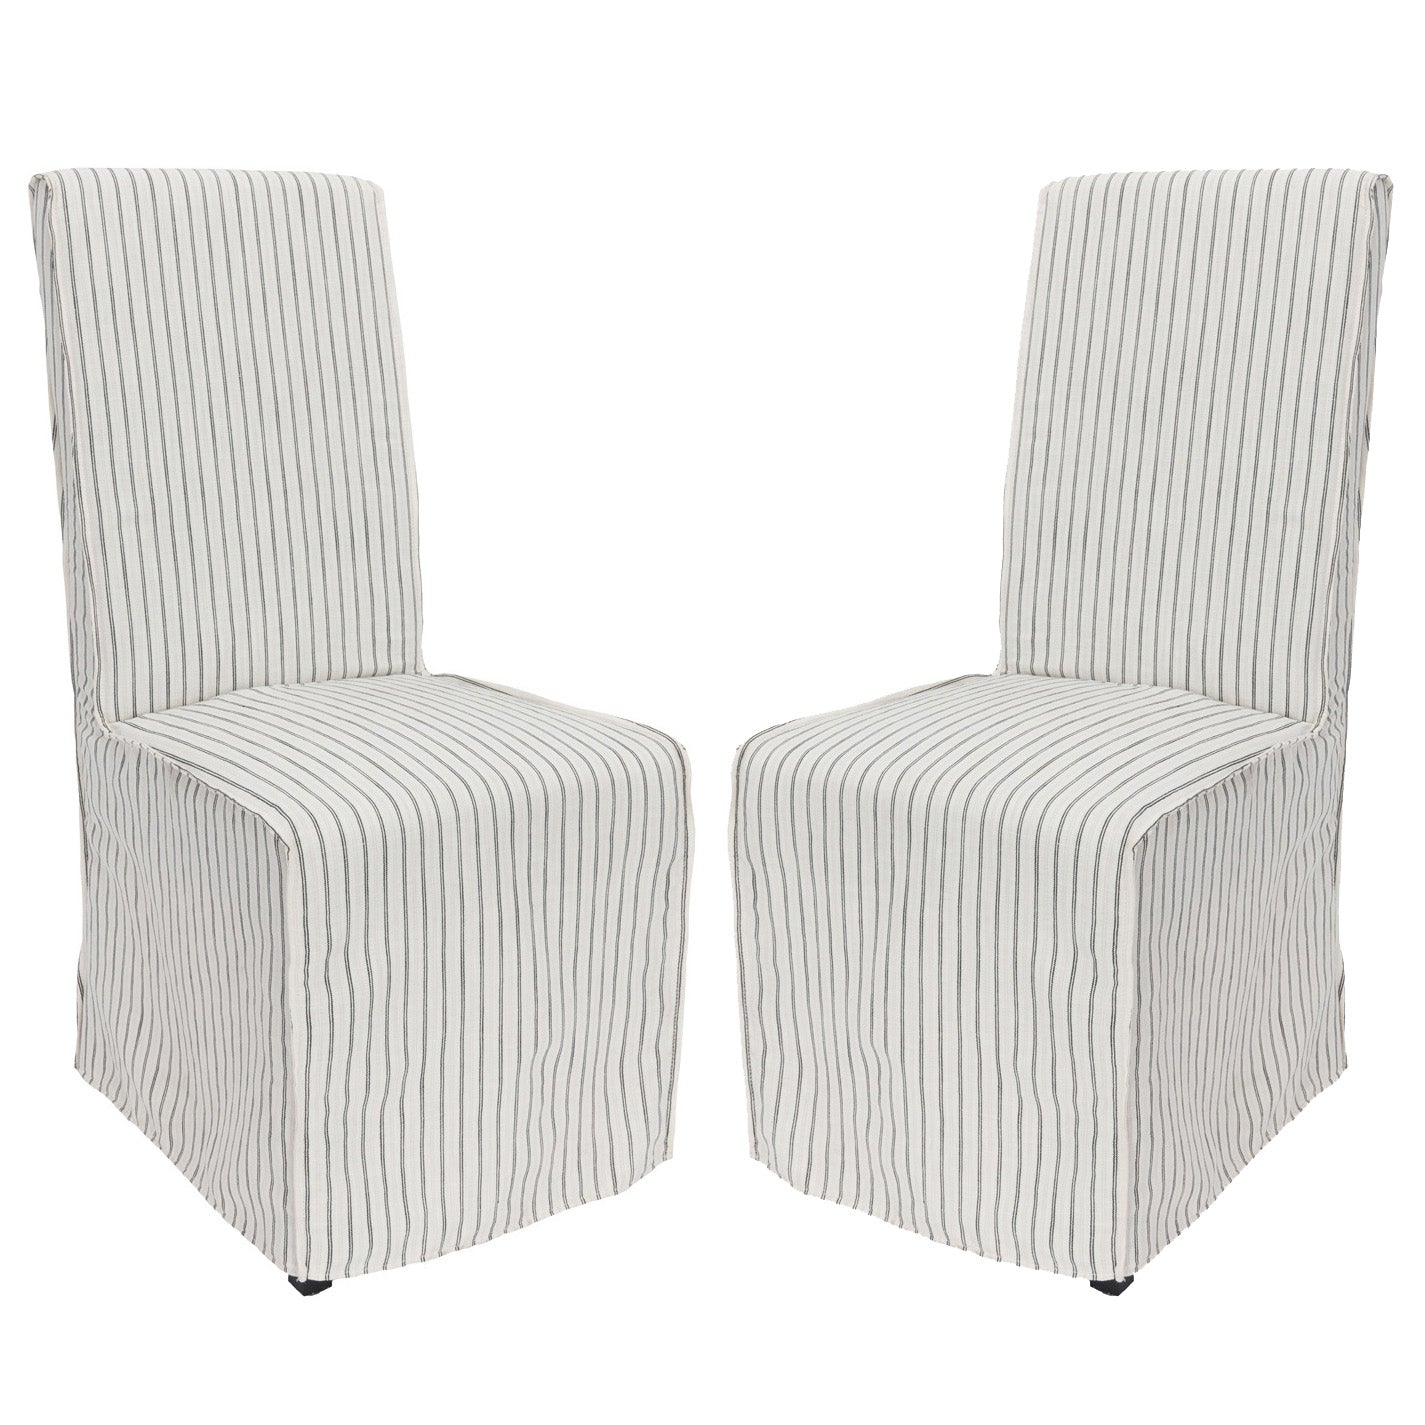 Arianna Slipcovered Dining Chair, Set of 2